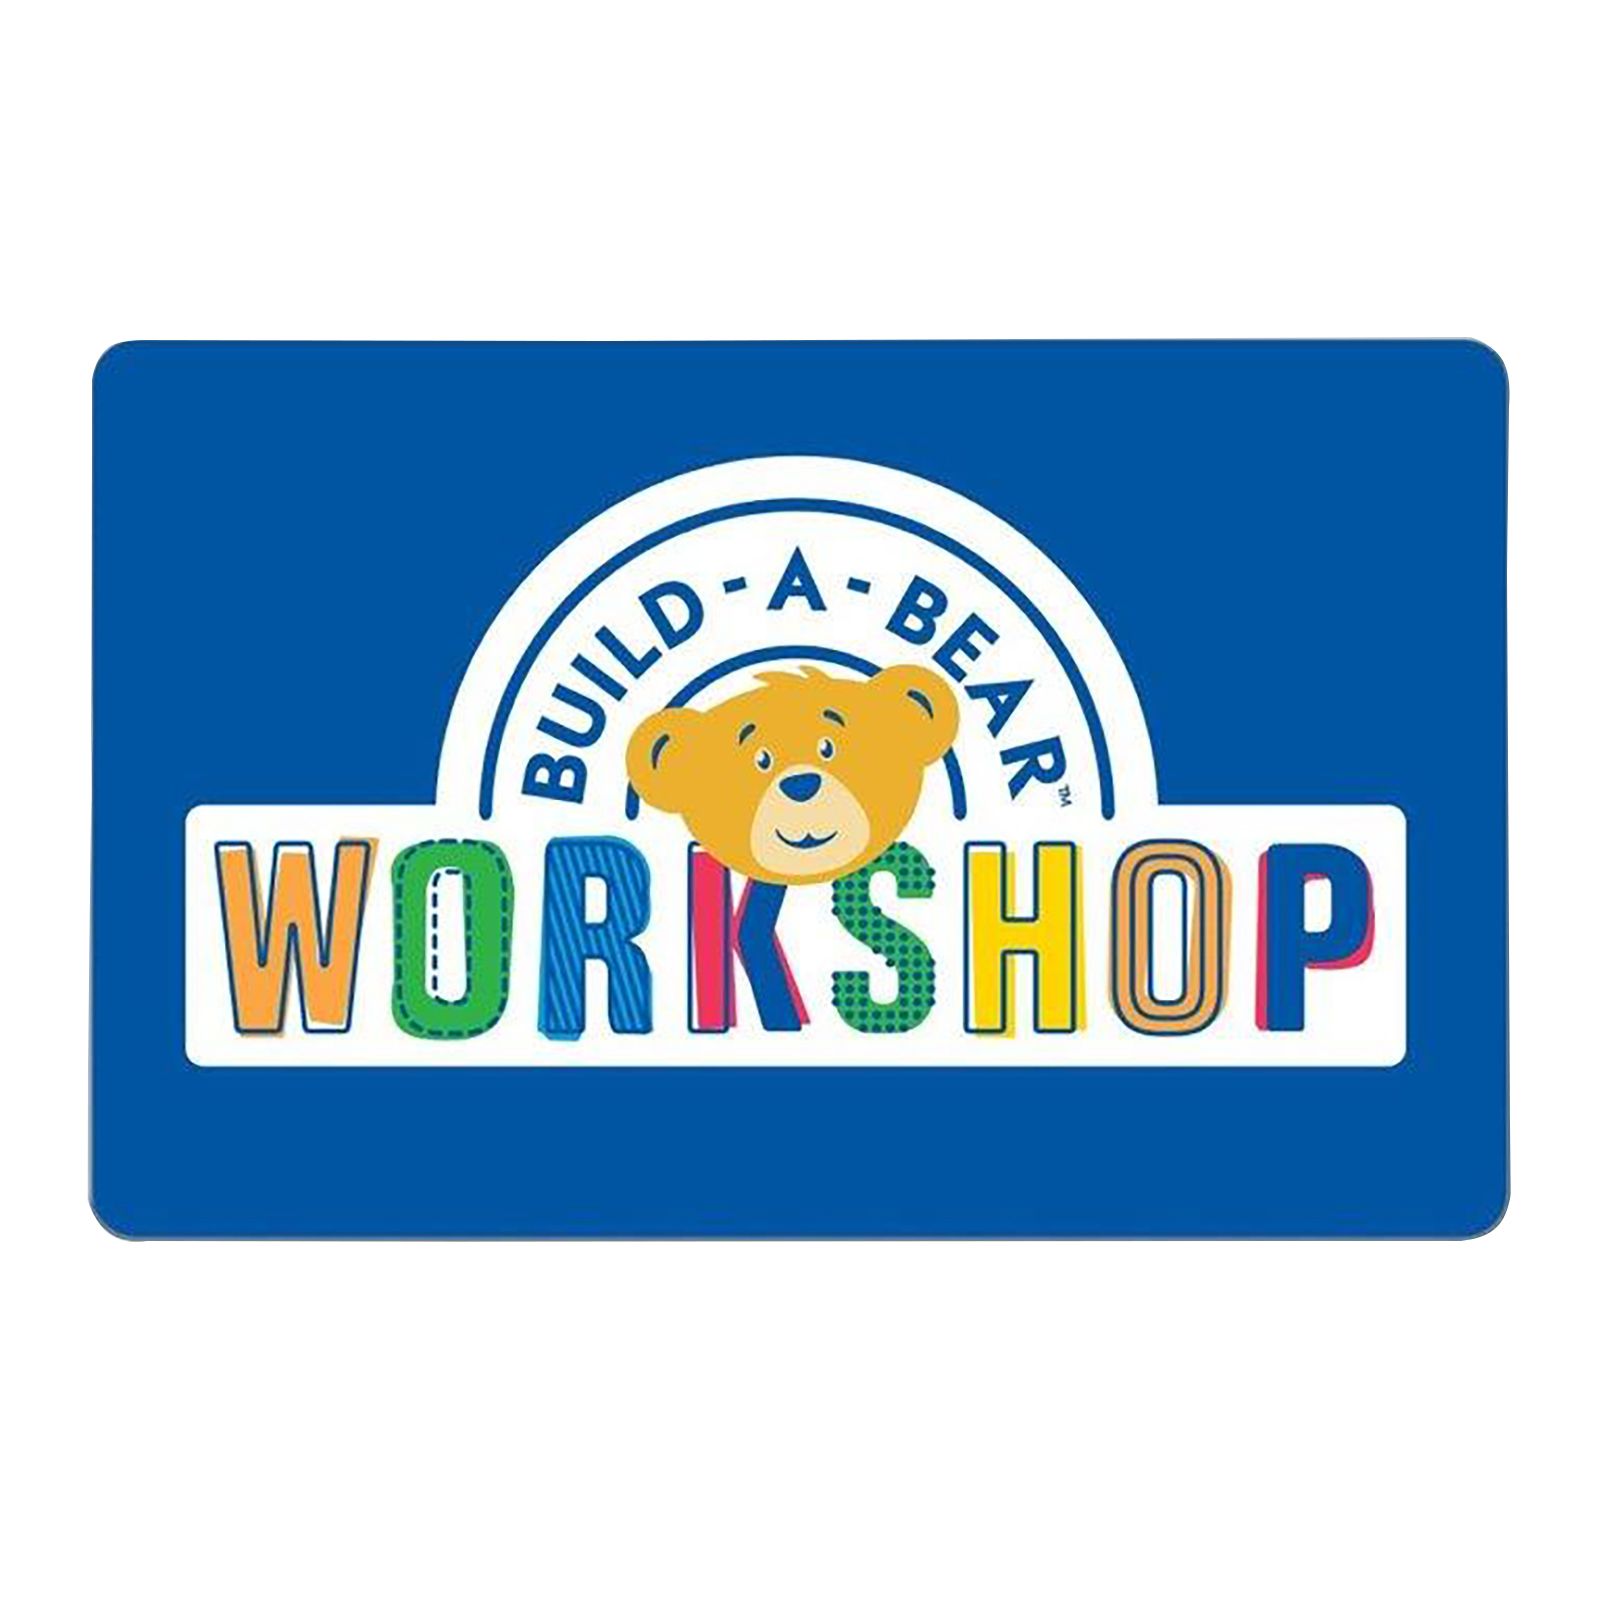 $25 Build A Bear Workshop Gift Card - $25 for $19.99